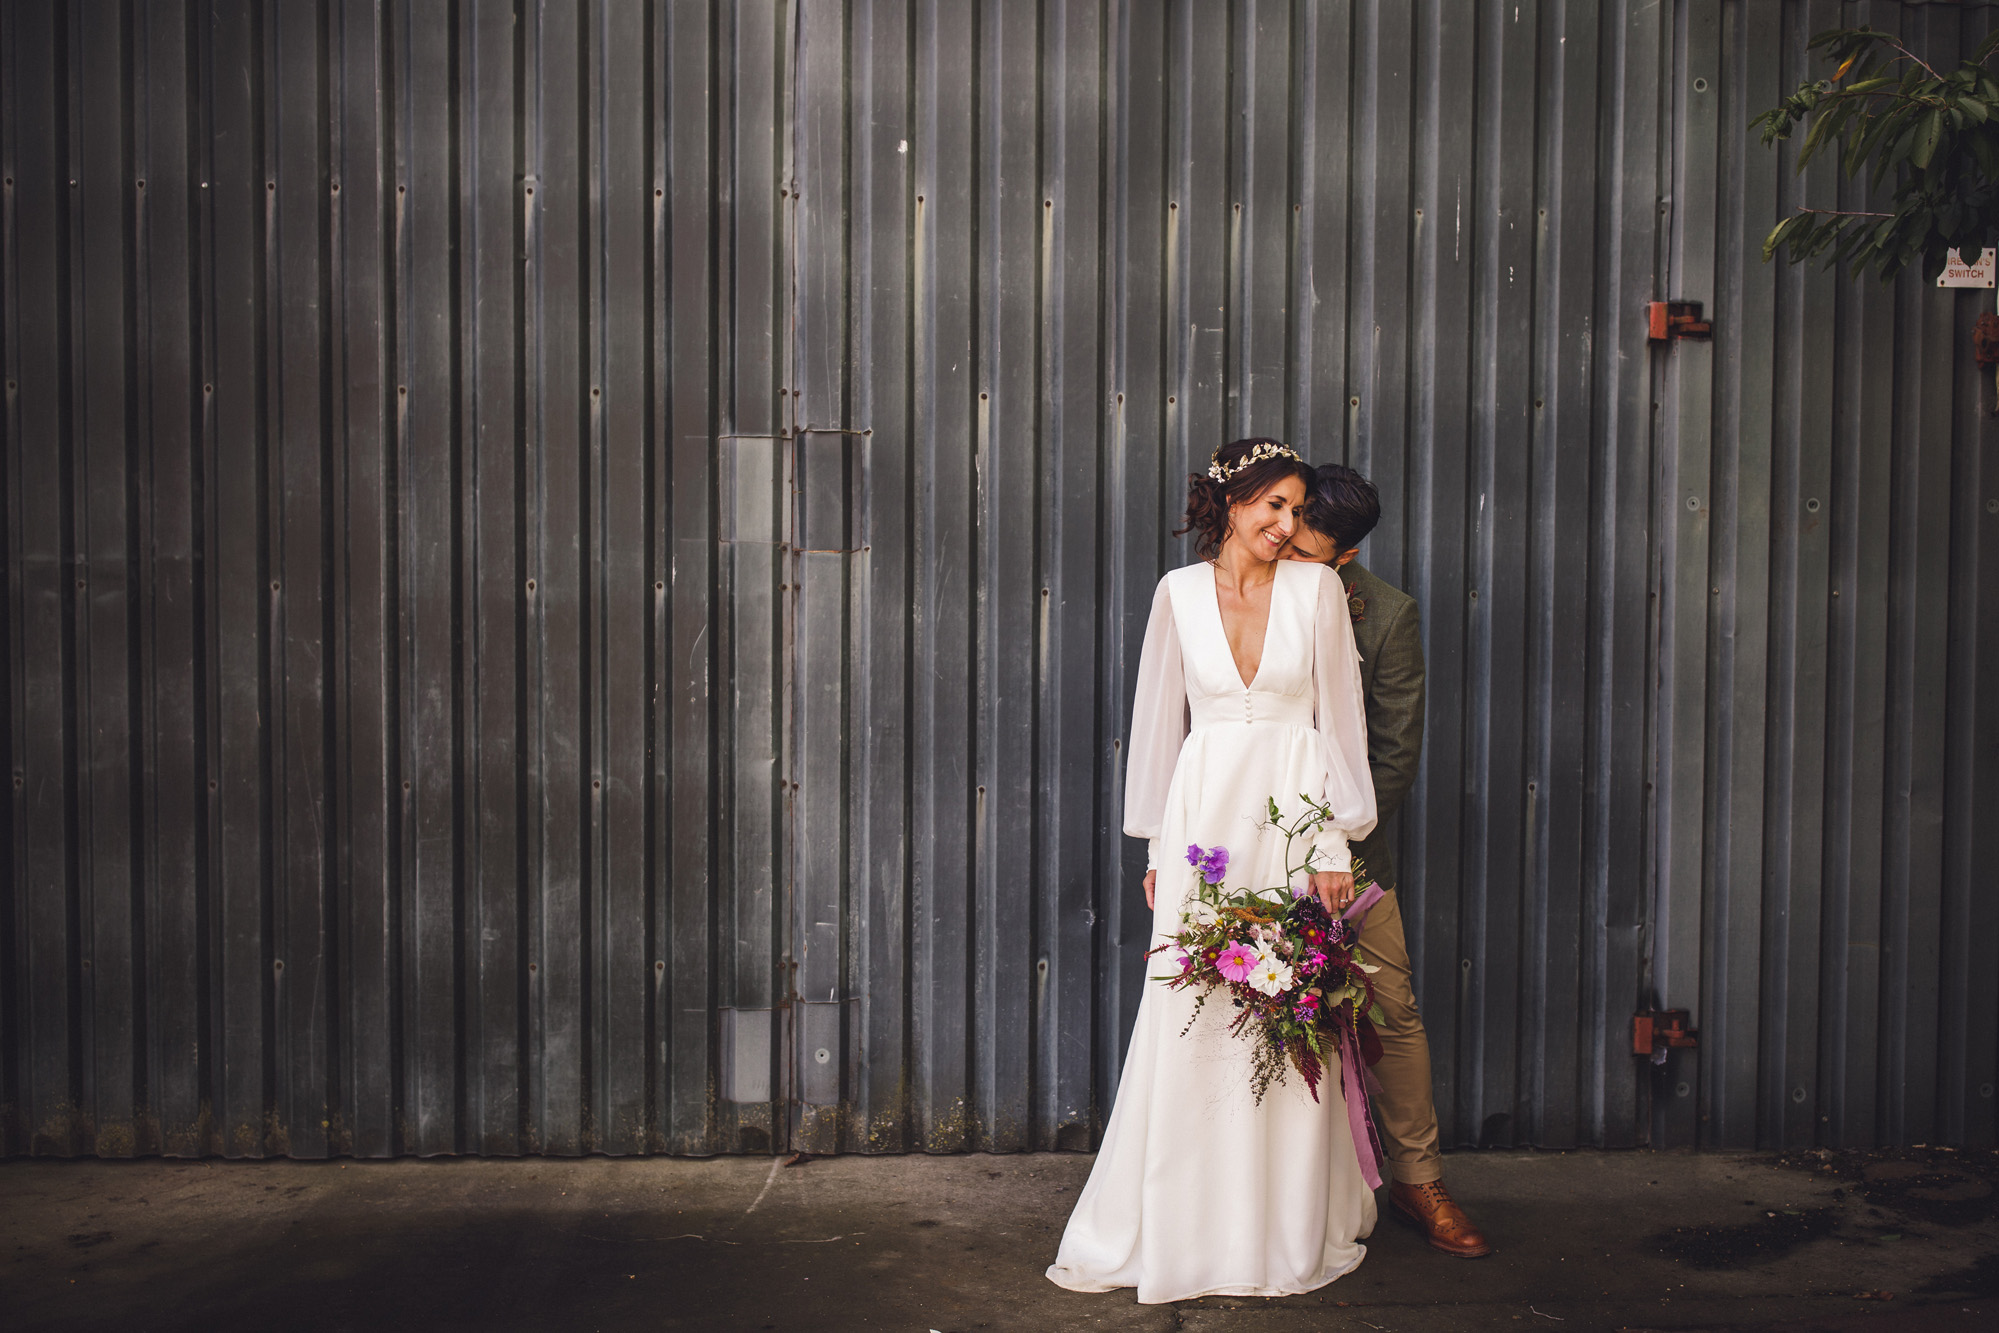 45 A 70s boho bride and her music inspired farm wedding